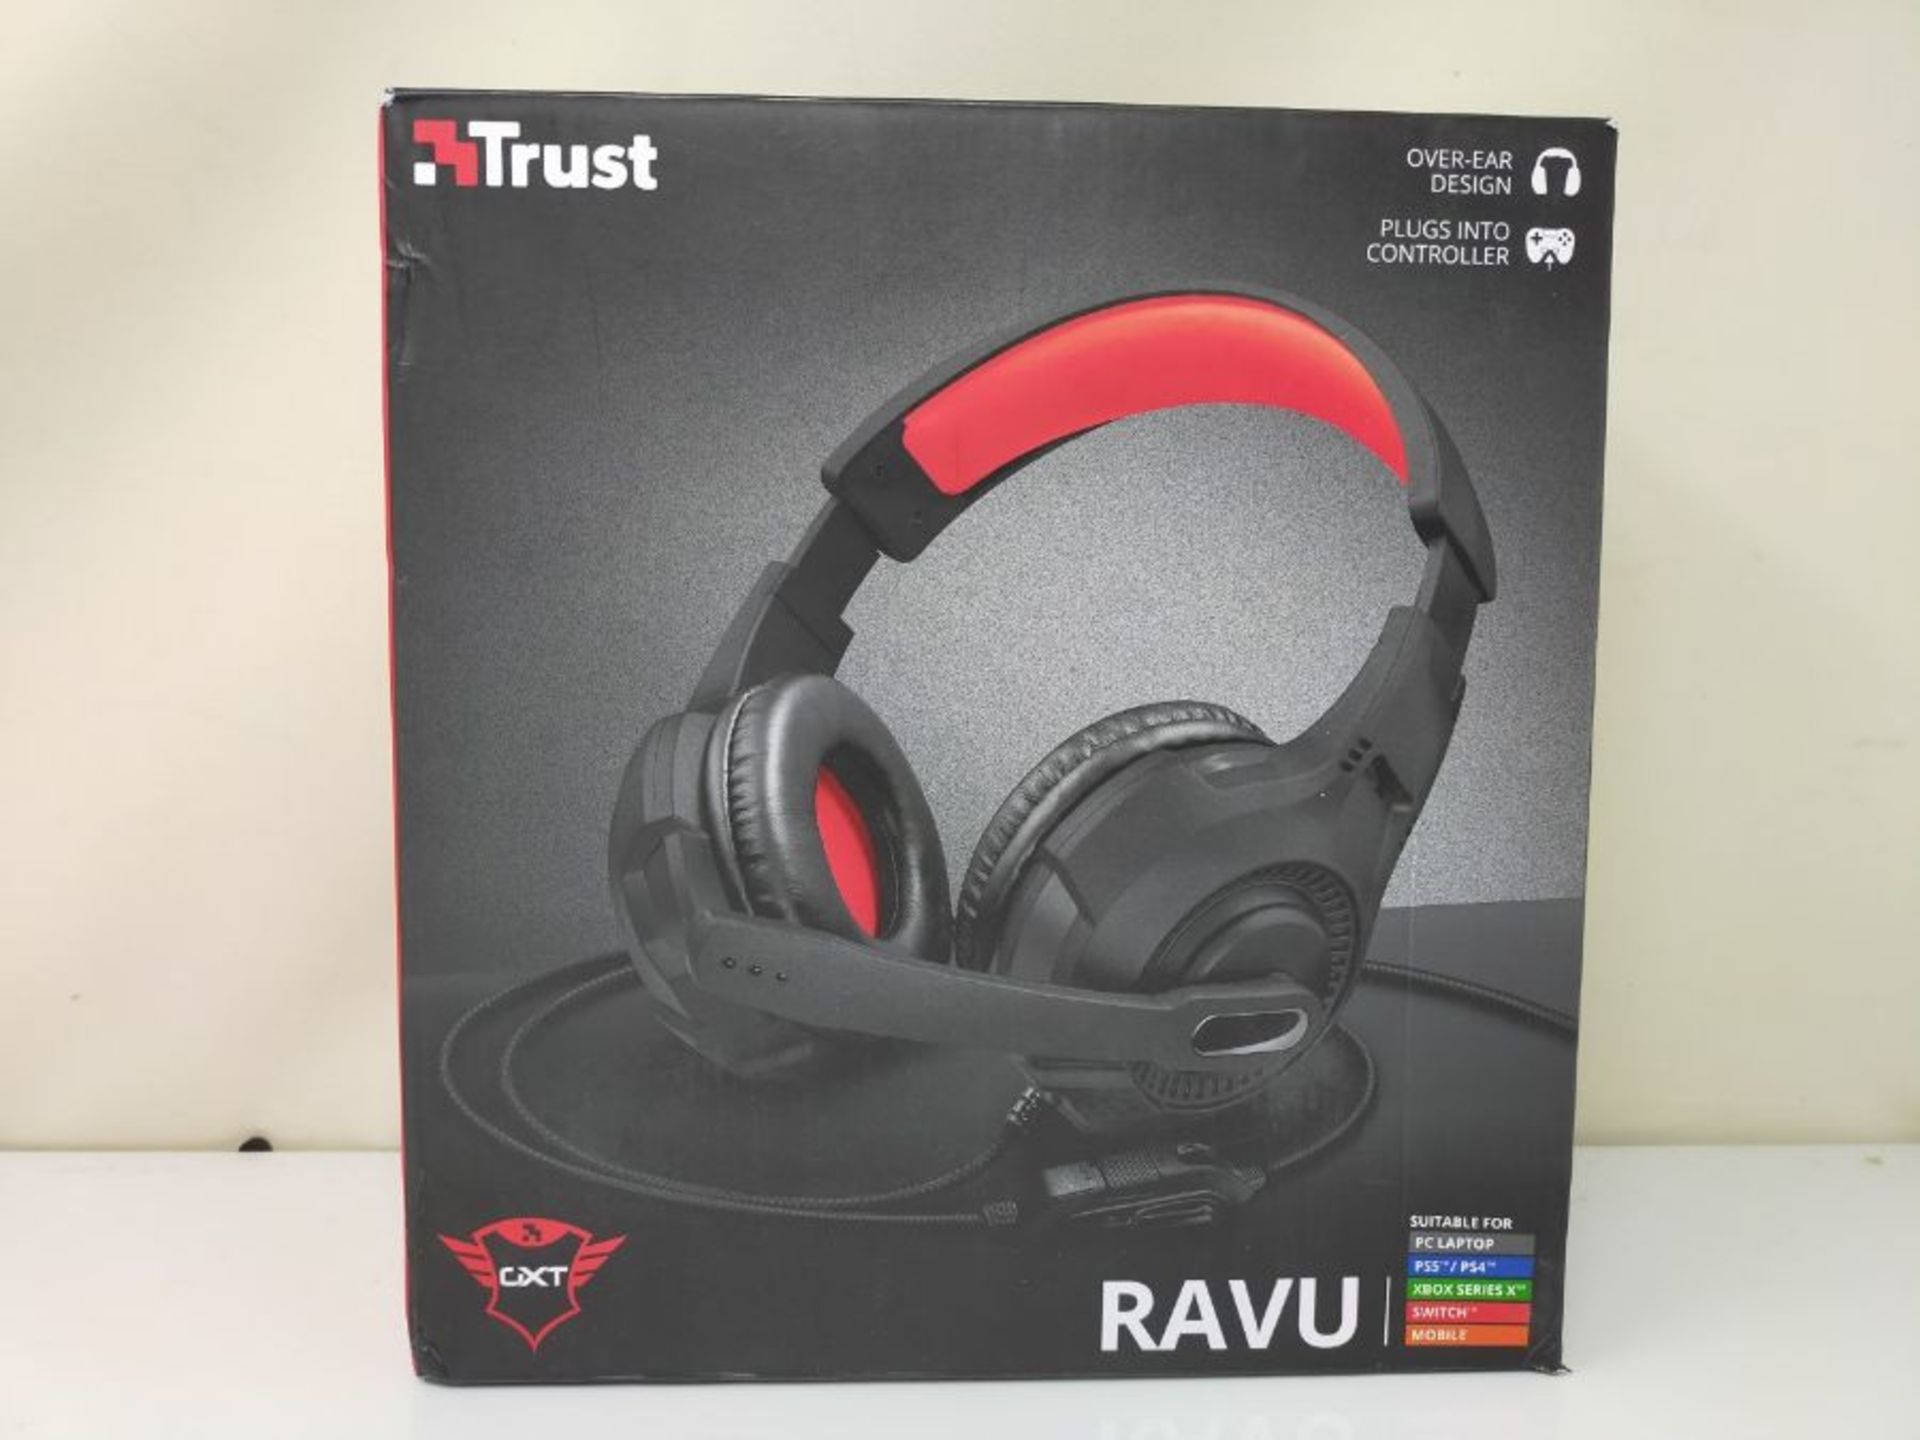 Trust Gaming Headset GXT 307 Ravu with Microphone, Fold Away Mic and Adjustable Headba - Image 2 of 3